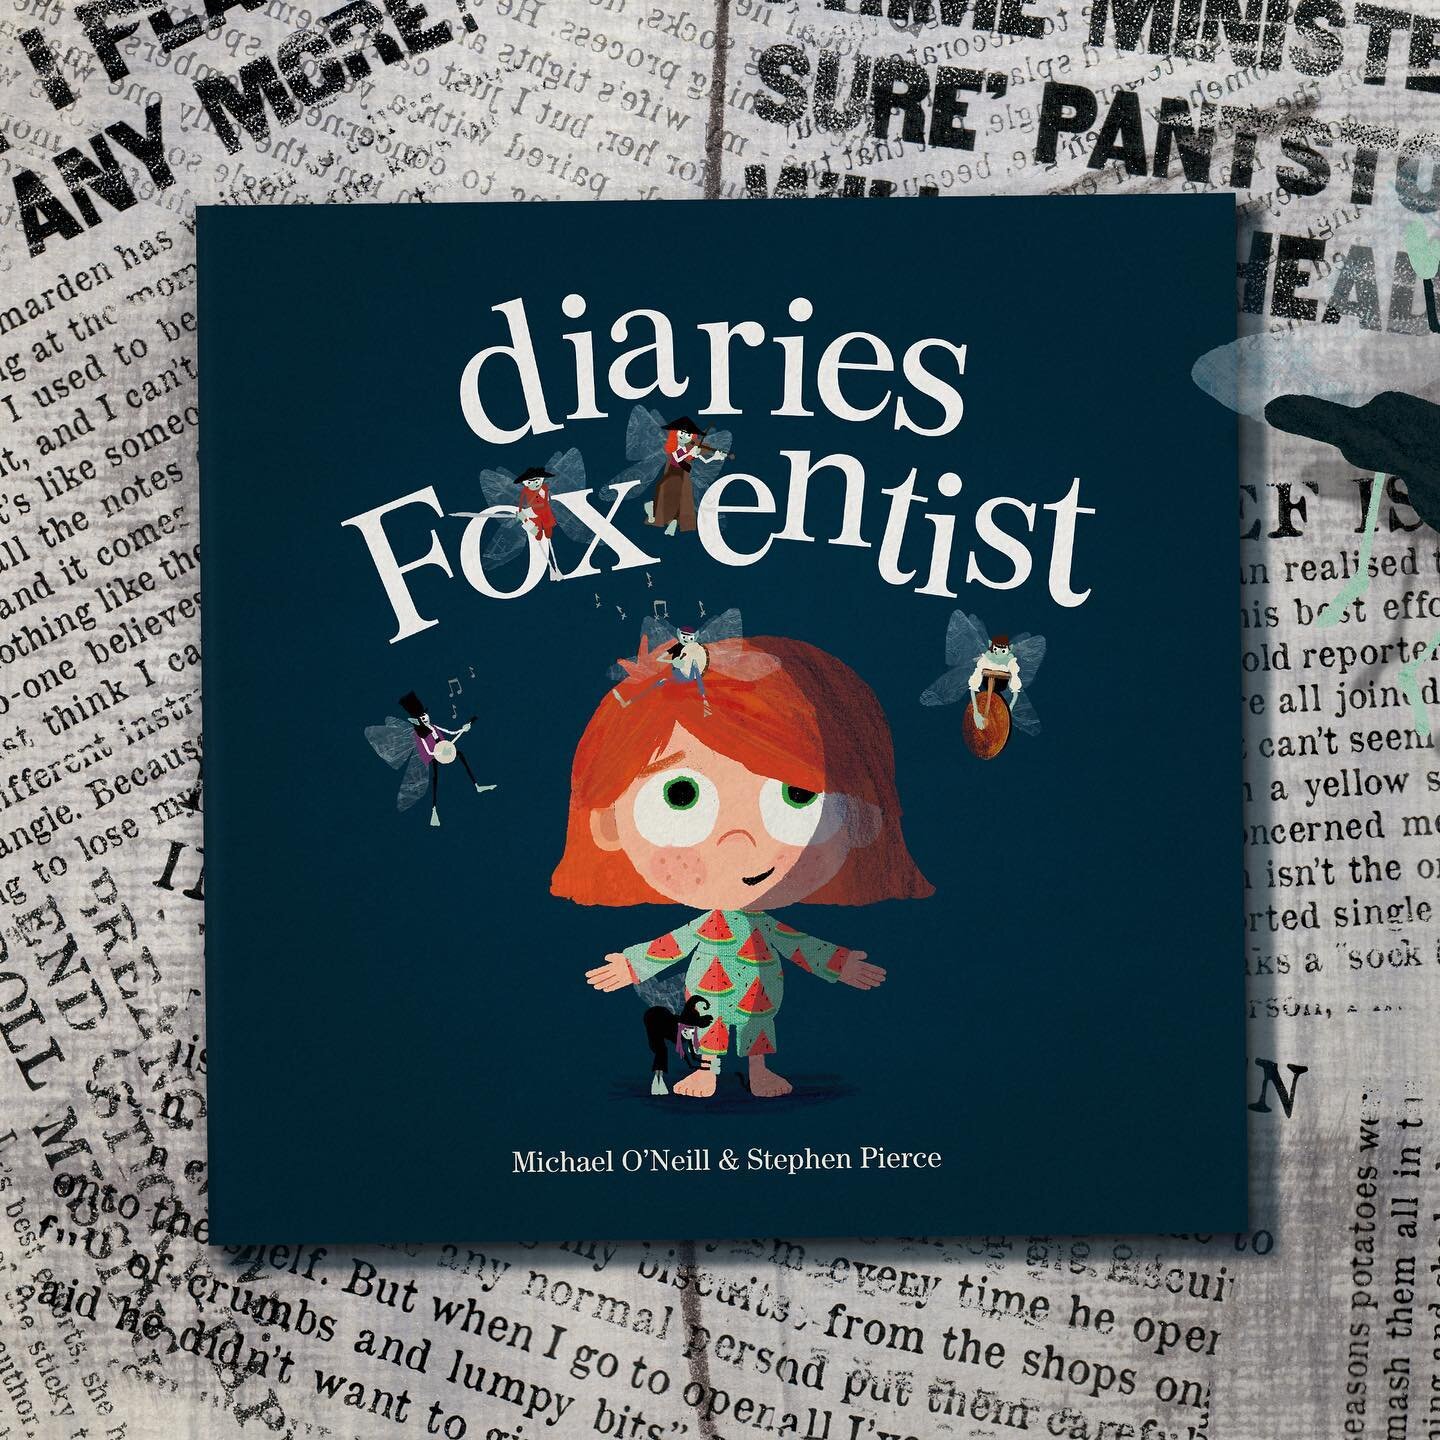 Uh-oh! That&rsquo;s not right! Someone&rsquo;s been messing with the titel - thees wrods are all mxied up!! #fairiesdontexist&nbsp;#fairiesdoexist&nbsp;#fairies&nbsp;#magic&nbsp;#bedtimestory&nbsp;#fairytale&nbsp;#newkidsbook&nbsp;#newchildrensbook&n